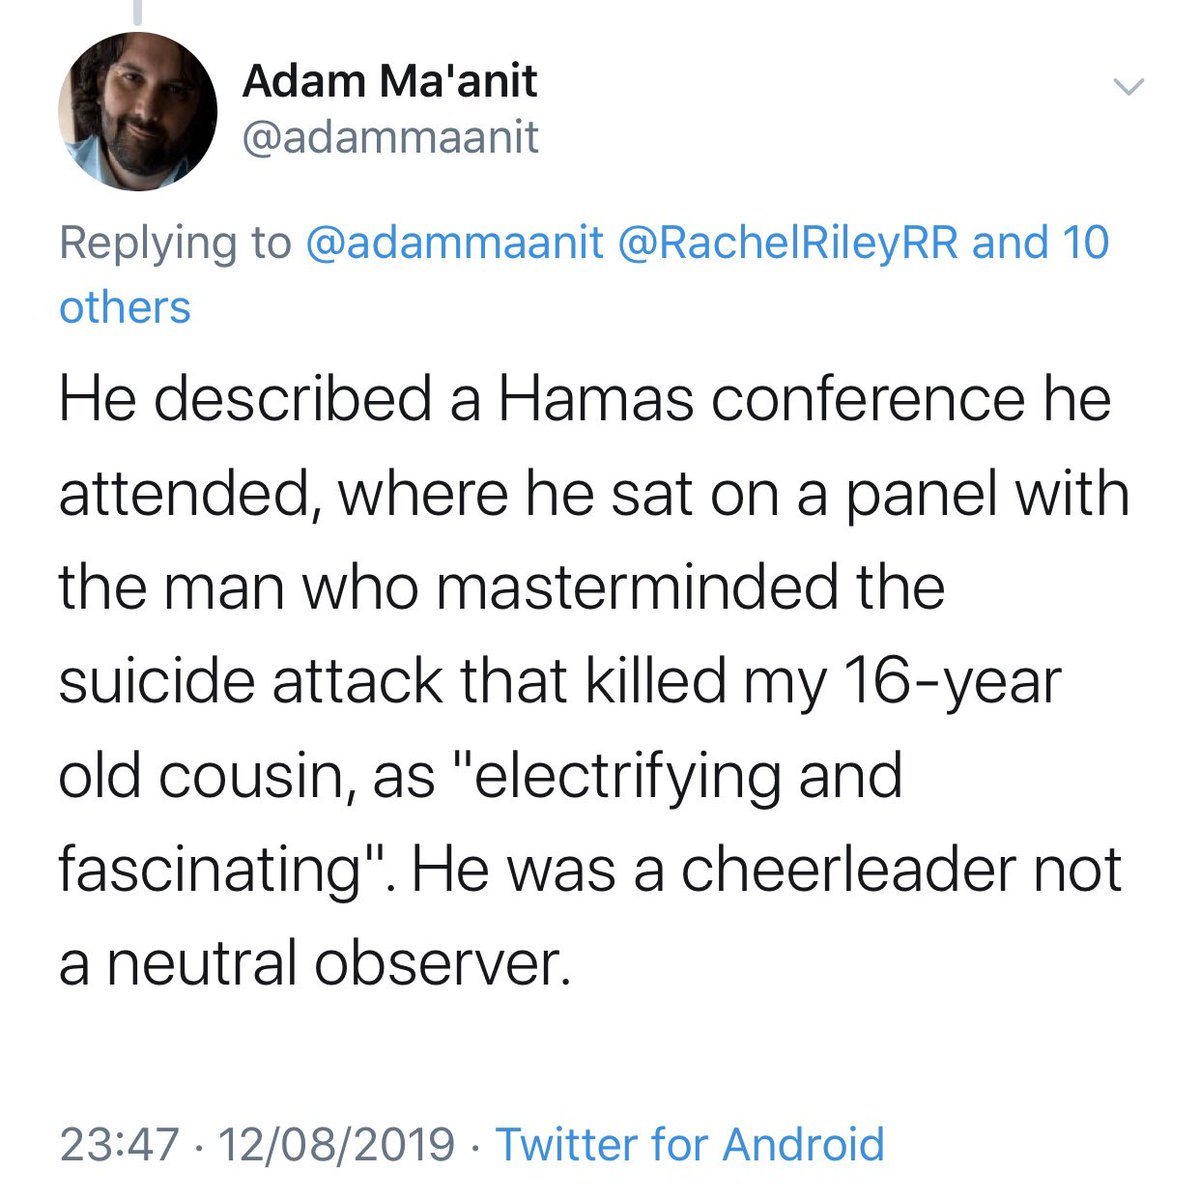 Corbyn on Hamas suicide bombers. (One reason British Jews are scared.) https://www.haaretz.com/world-news/europe/report-corbyn-was-at-conference-with-senior-hamas-officials-1.6390627